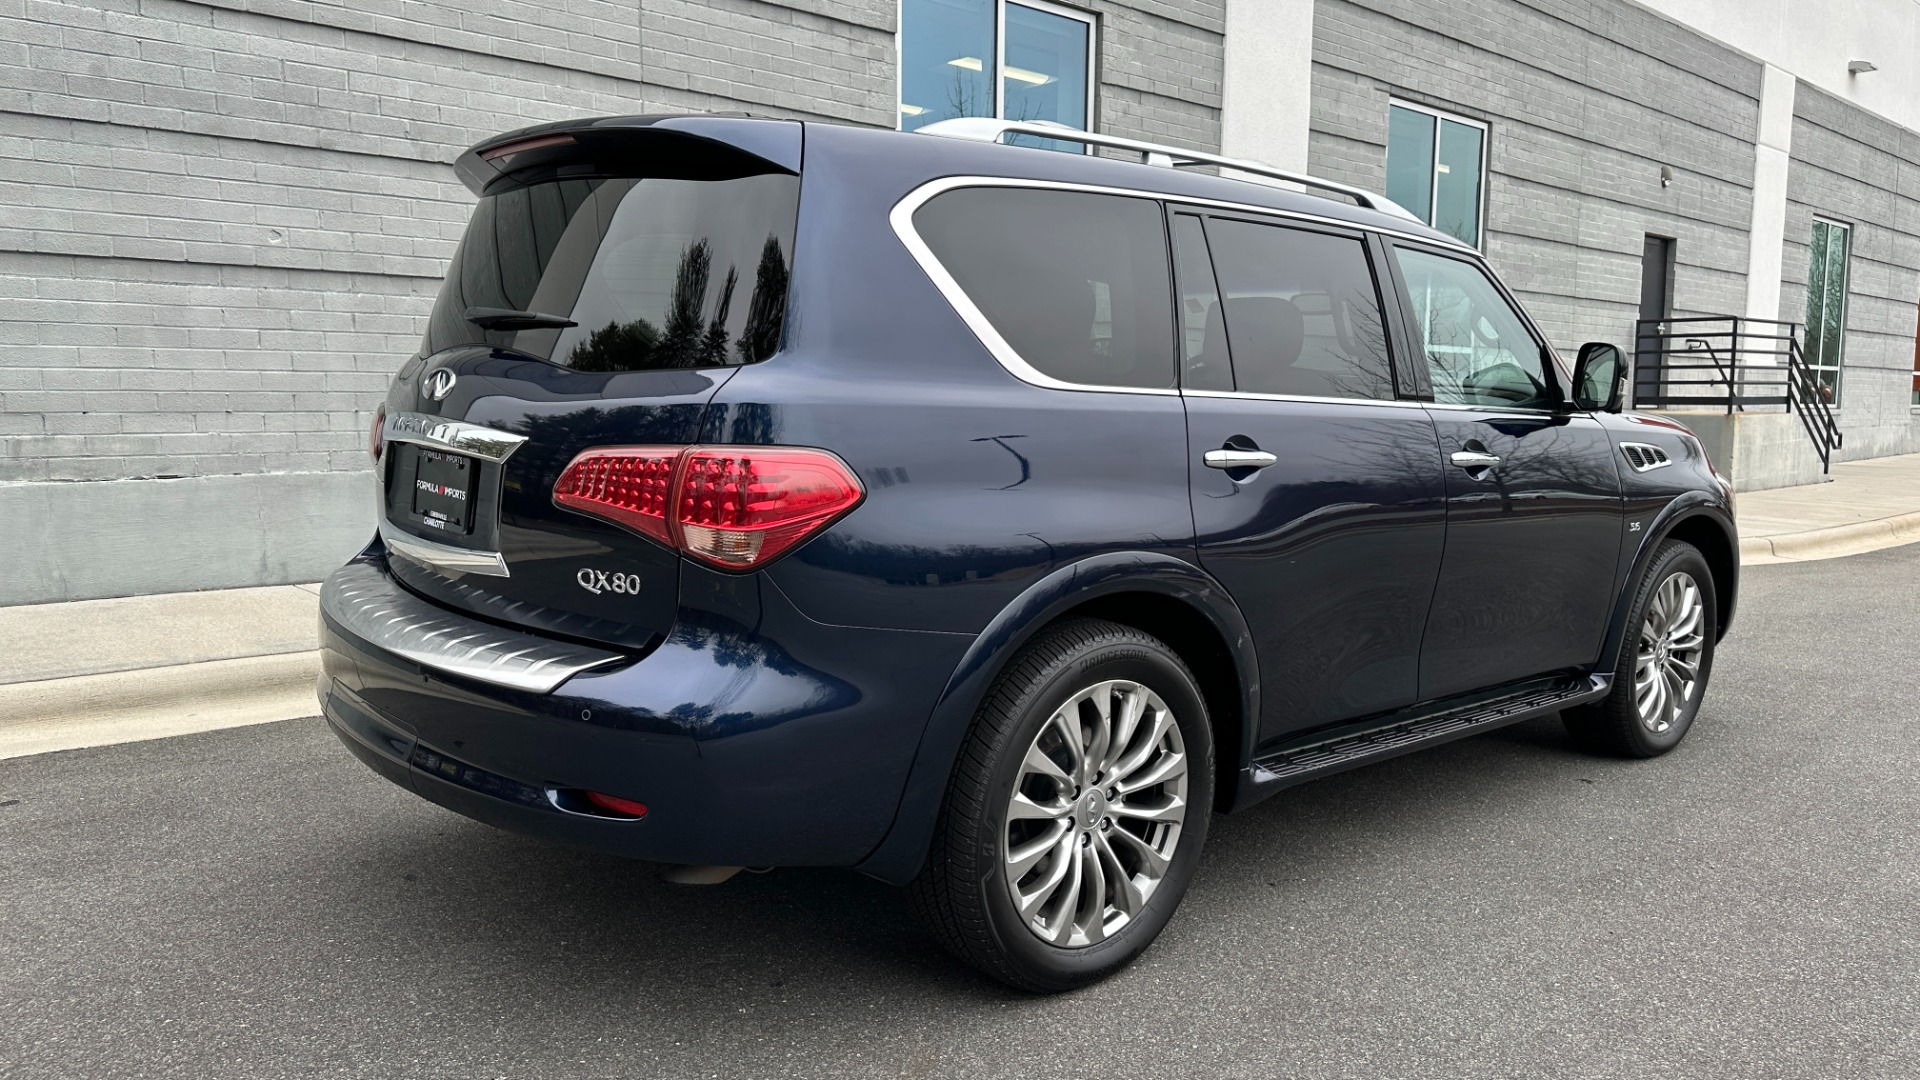 Used 2016 INFINITI QX80 LIMITED / 22IN WHEELS / THEATER PACKAGE / DRIVER ASSISTANCE / V8 / 4WD for sale $33,995 at Formula Imports in Charlotte NC 28227 7